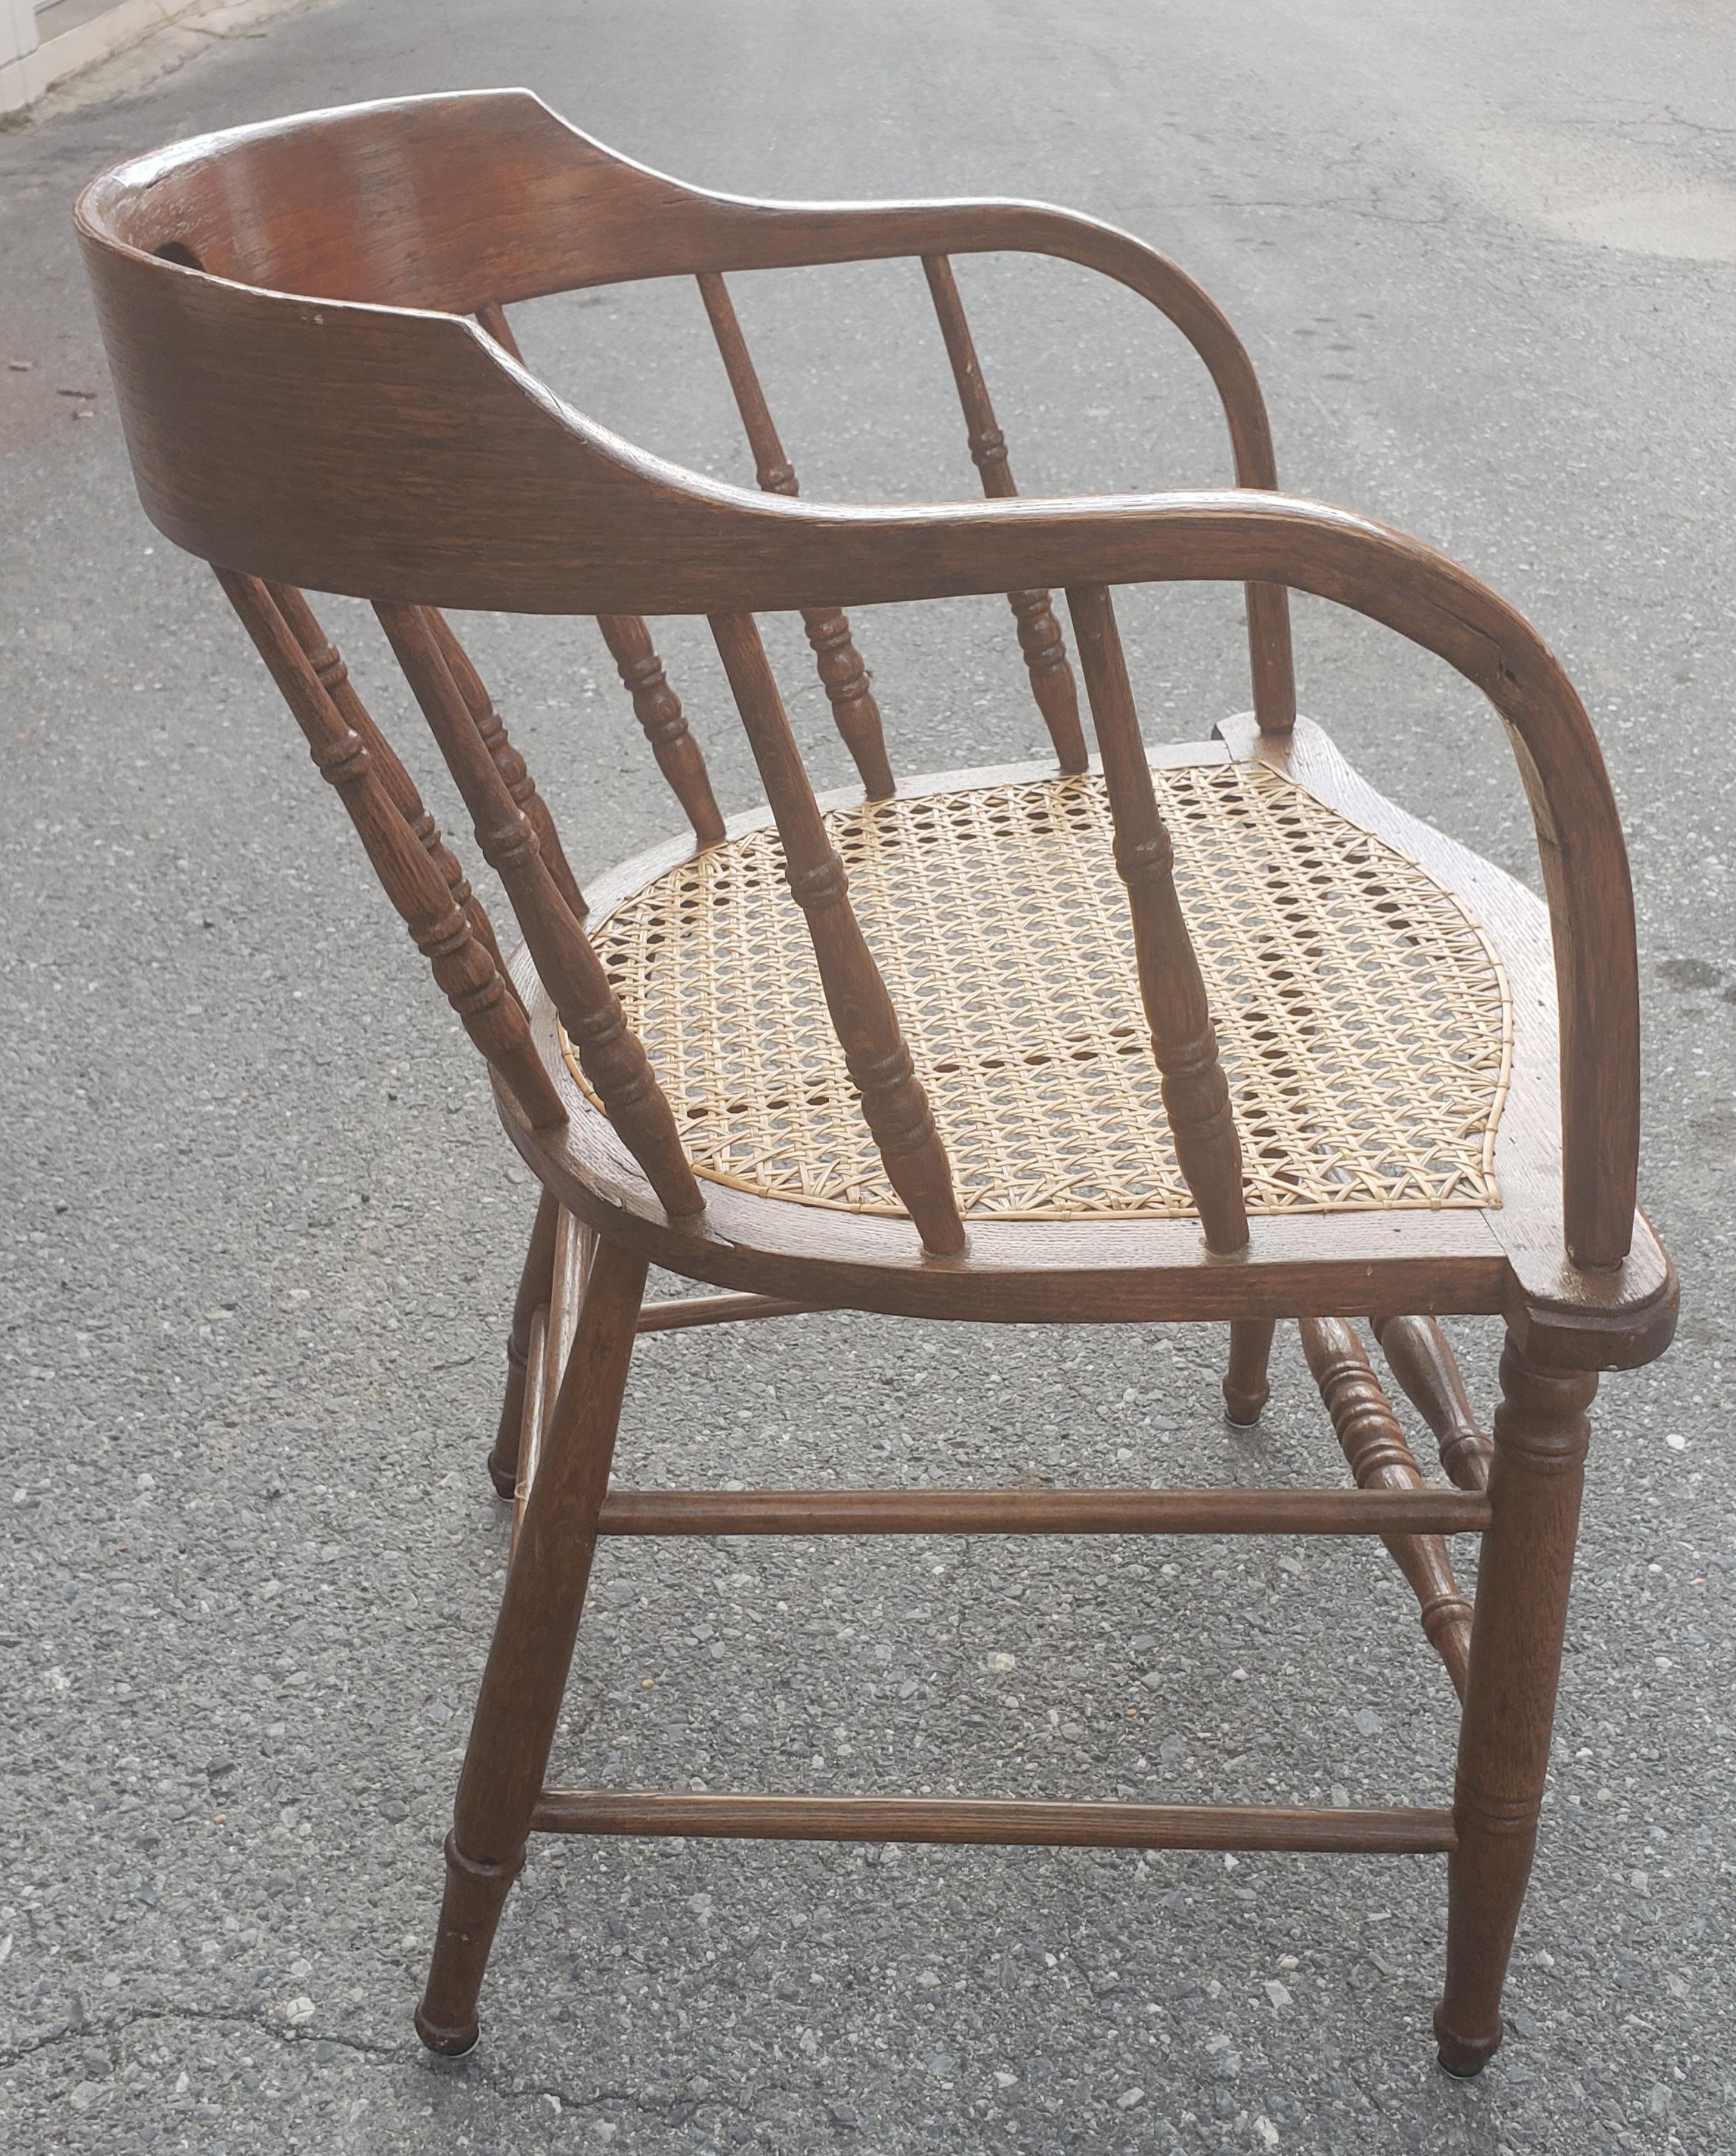 Antique Barrel Back Firehouse Windsor Chair with Cane Seat 6